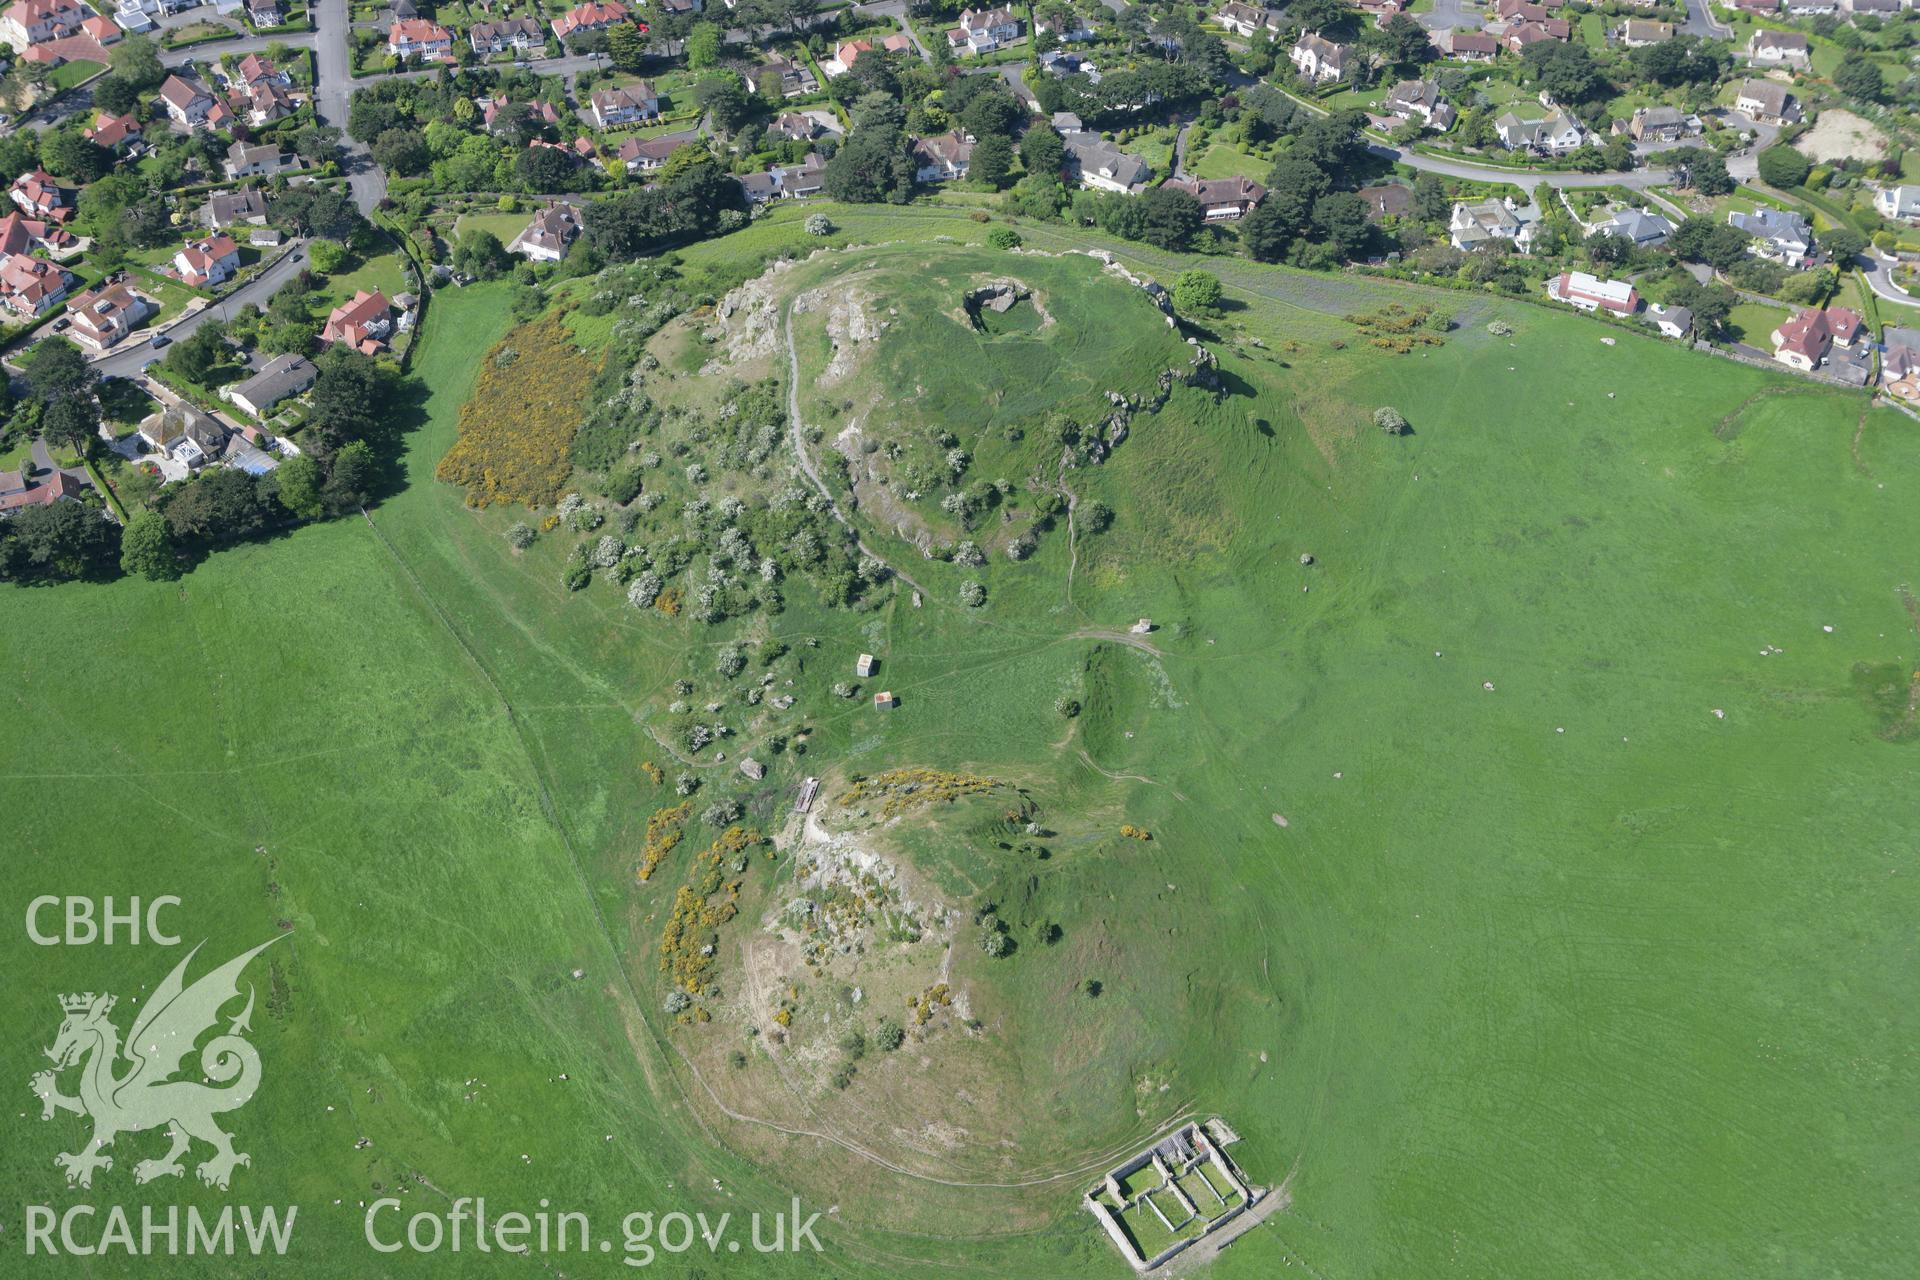 RCAHMW colour oblique photograph of Deganwy Castle. Taken by Toby Driver on 03/05/2011.